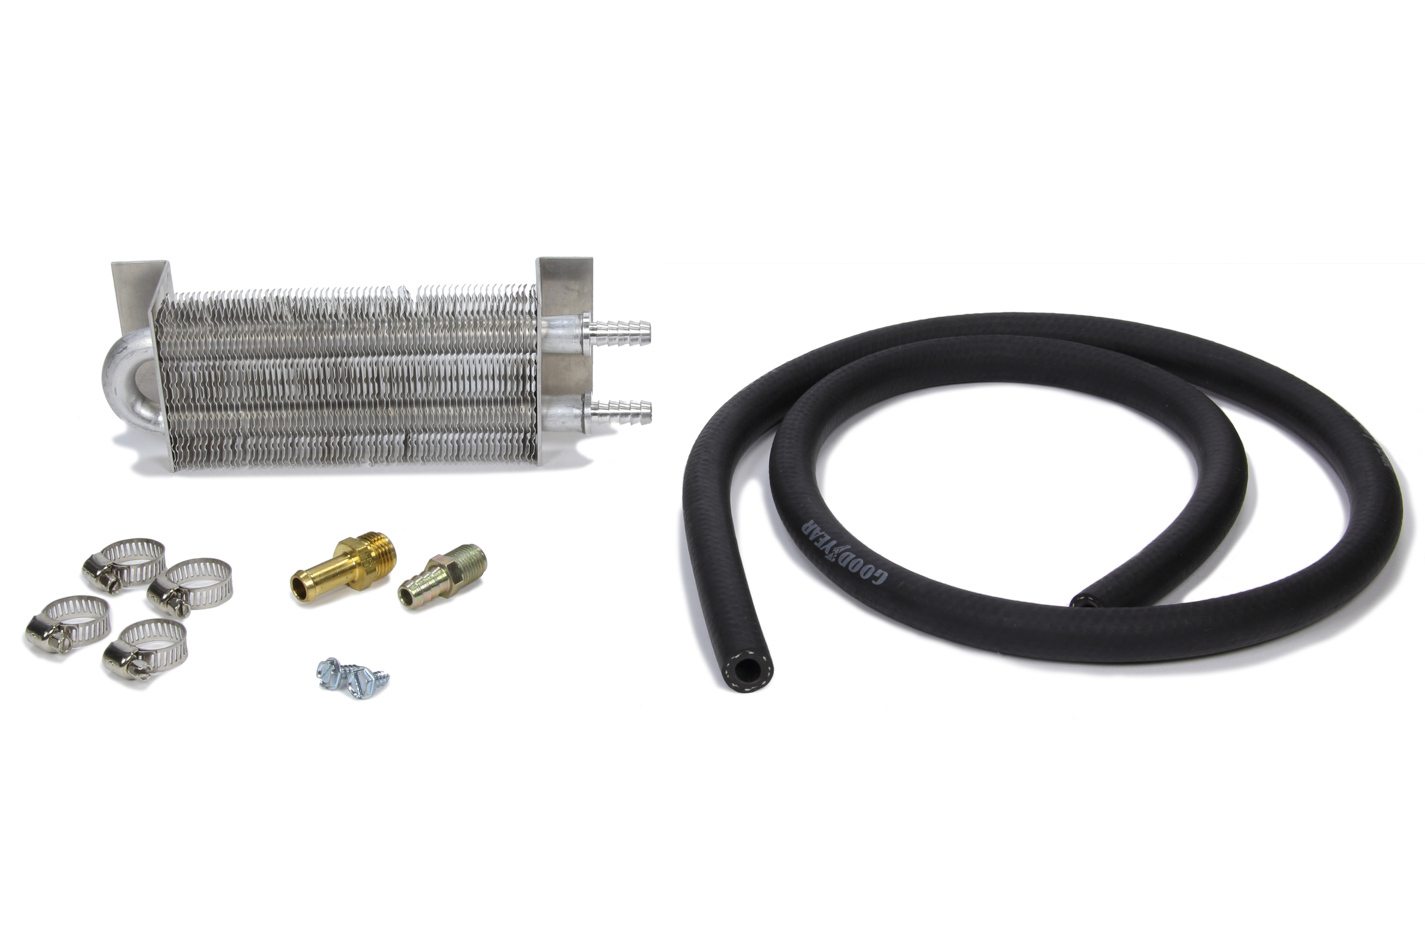 Perma Cool 71001 Fluid Cooler, 1.500 x 2.500 x 7.500 in, Tube Type, 11/32 in Hose Barb Inlet / Outlet, Fittings / Hardware / Hose, Aluminum, Natural, Fuel / Power Steering, Kit